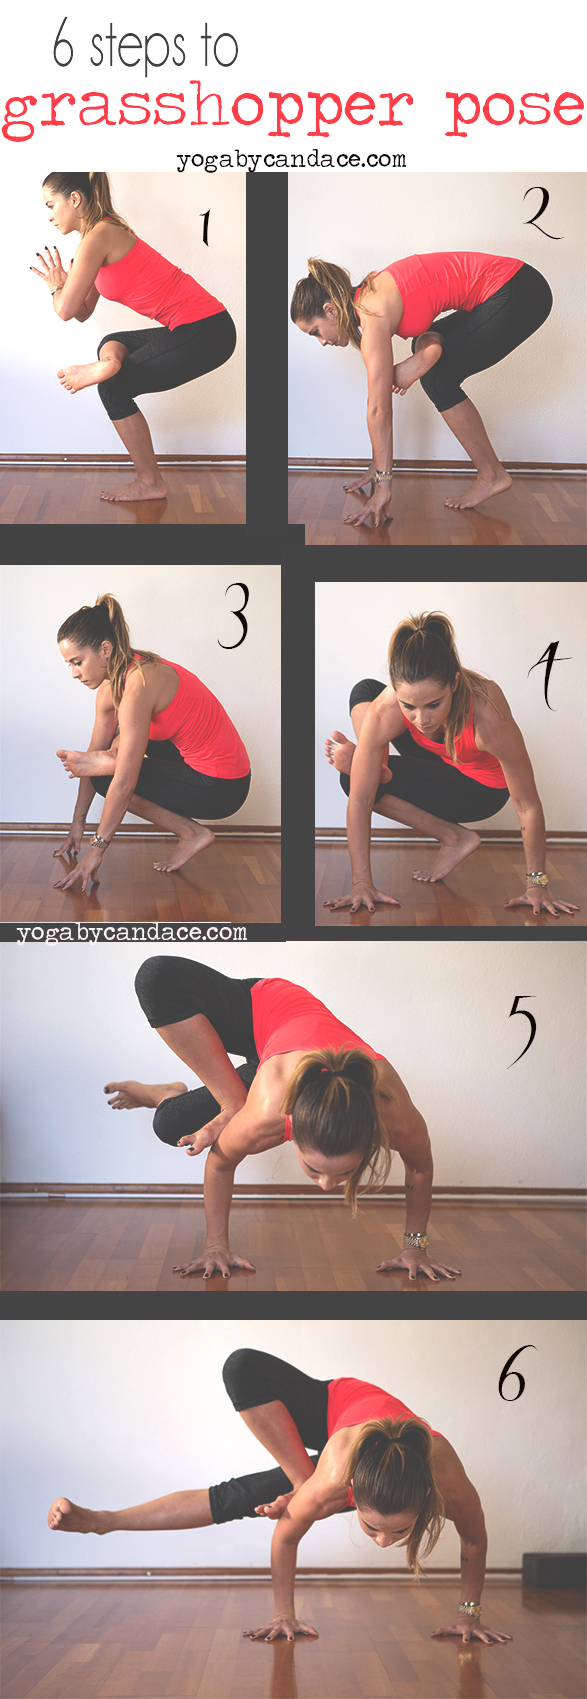 7 Yoga Poses To Improve Your Focus & Concentration — Jessica Richburg